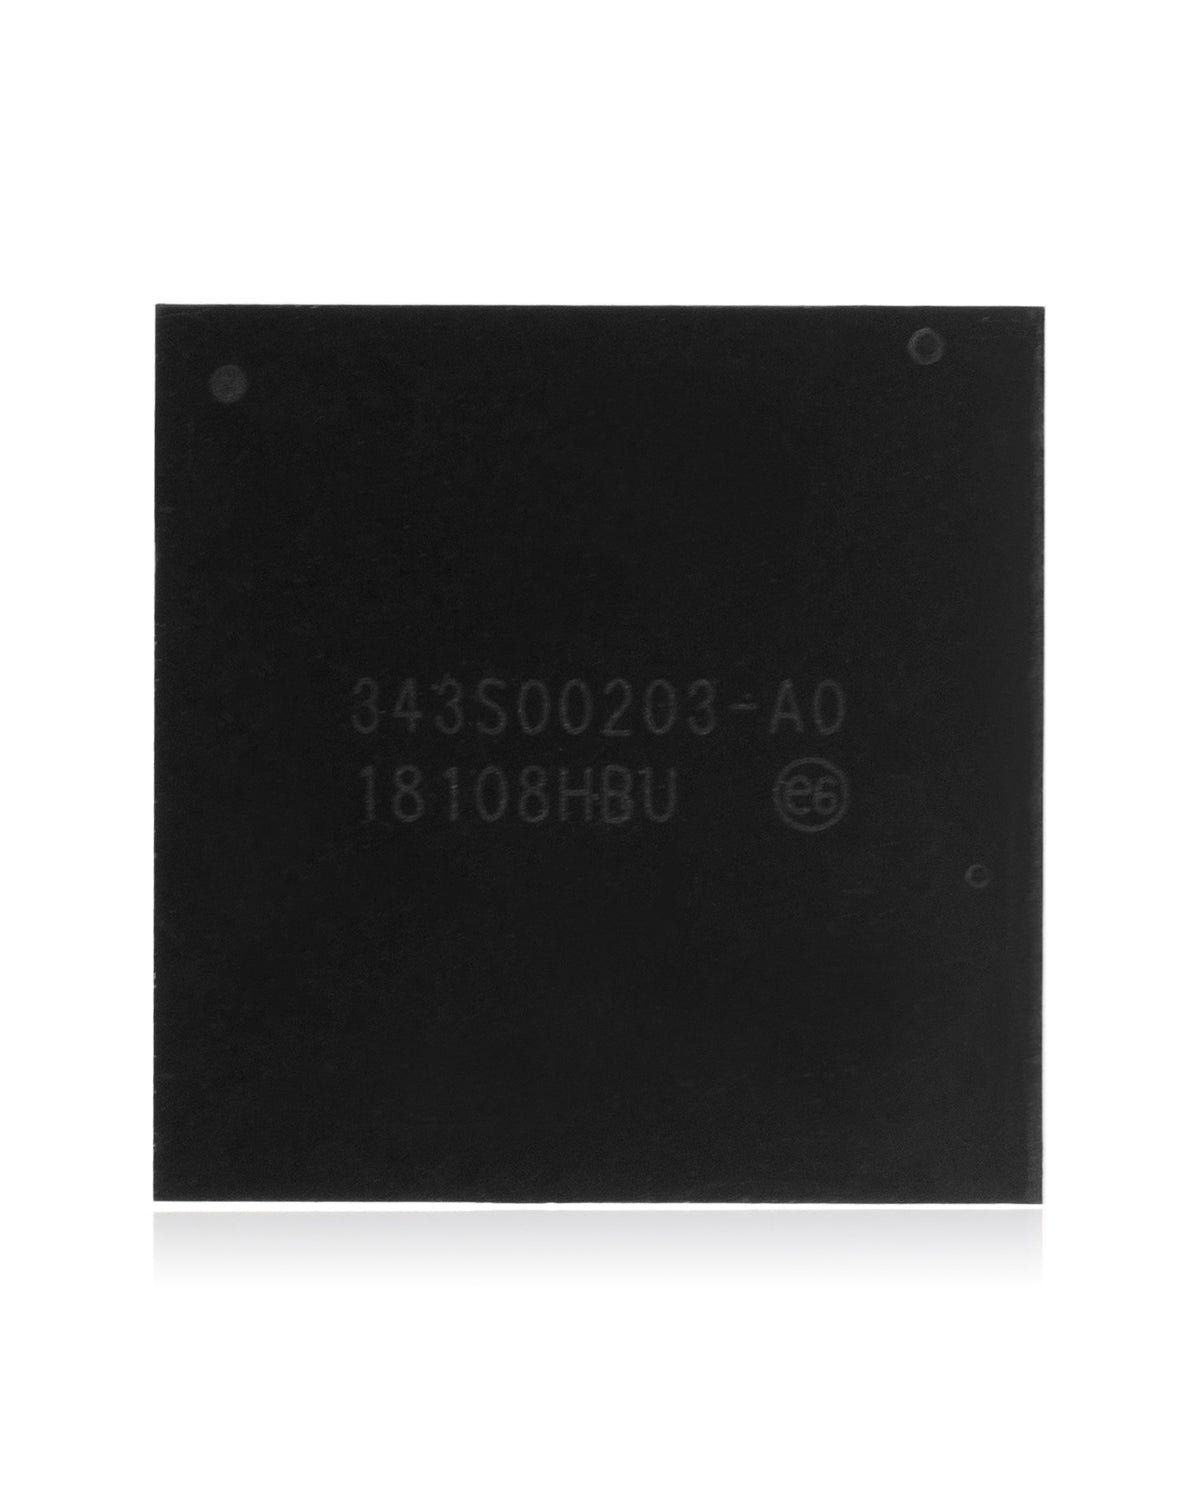 POWER MANAGEMENT PMIC IC FOR IPAD 6 (2018) (343S00203)